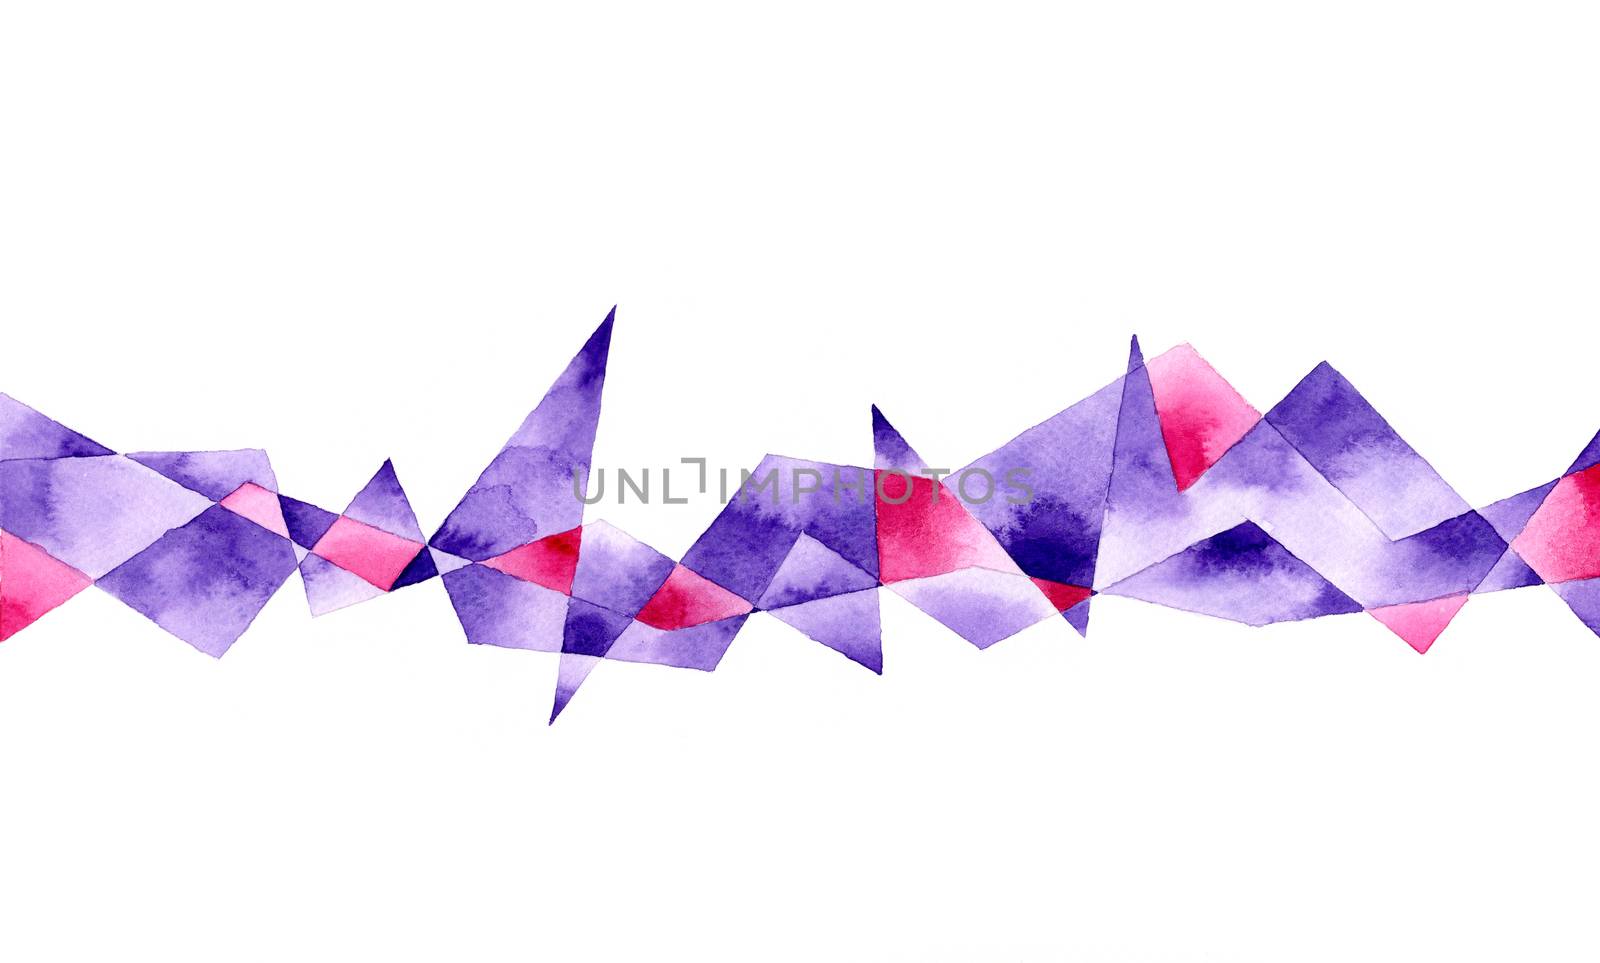 Purple and pink polygon abstract frame on white background. Template for style design. Watercolor hand painting illustration. by Ungamrung